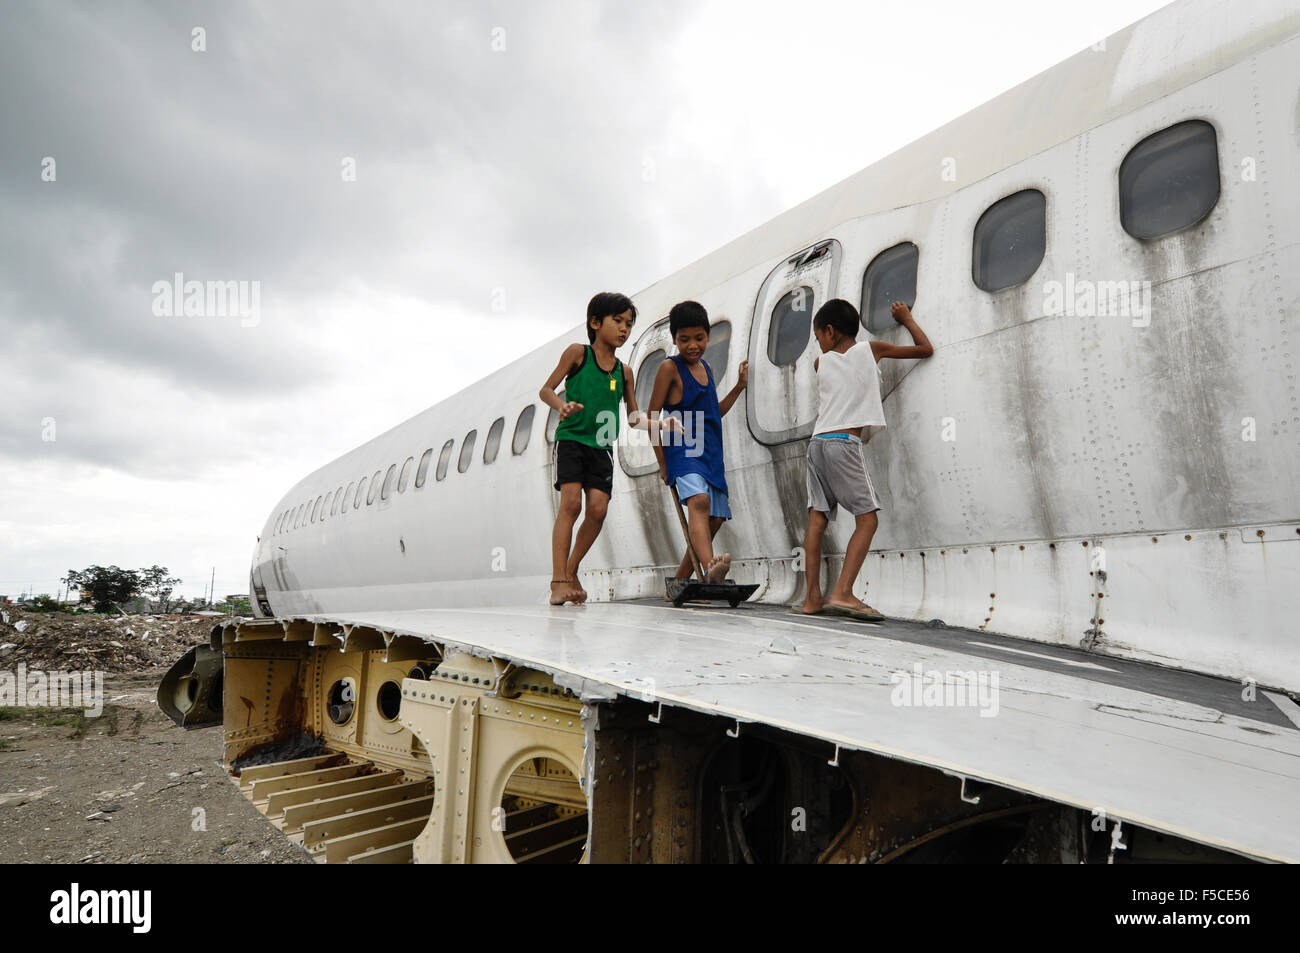 Children play on the wreck of an airplane at a vacant lot in Paranaque City, south of Manila, Philippines. Stock Photo